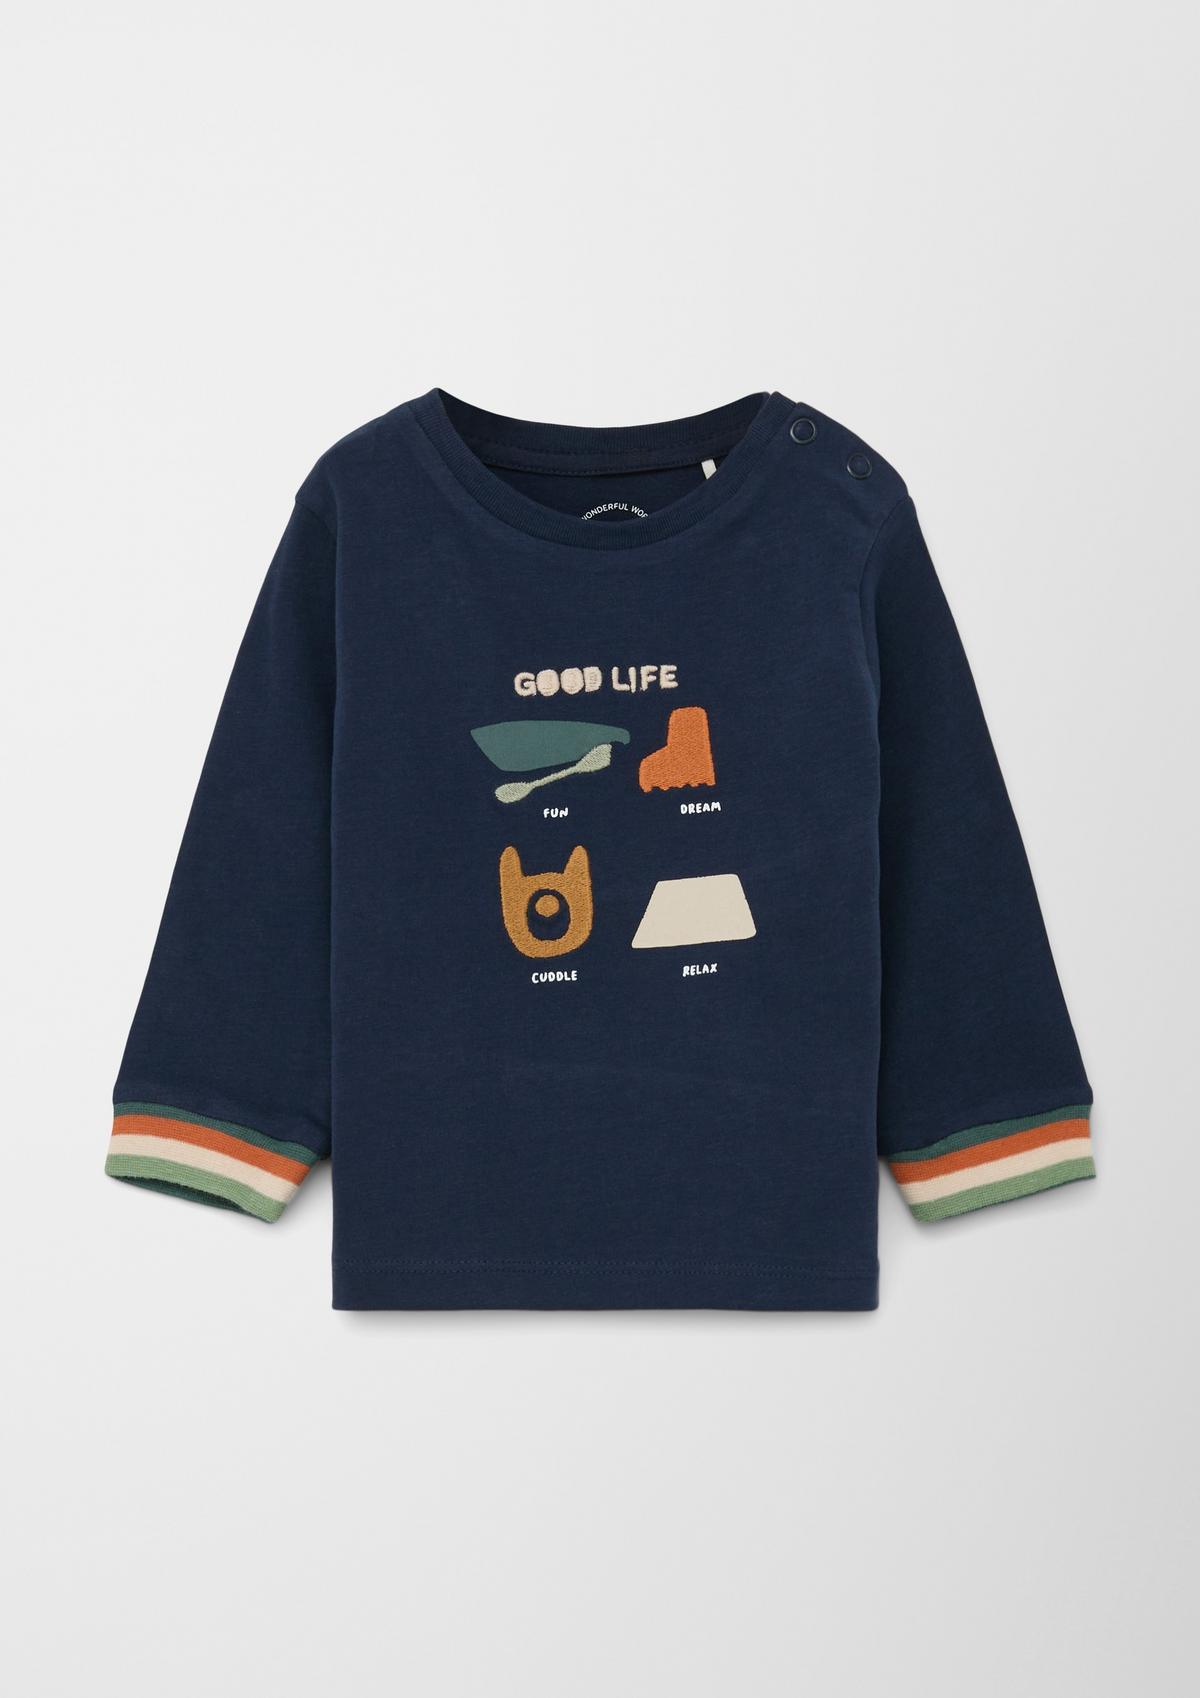 s.Oliver Long sleeve top with cute artwork